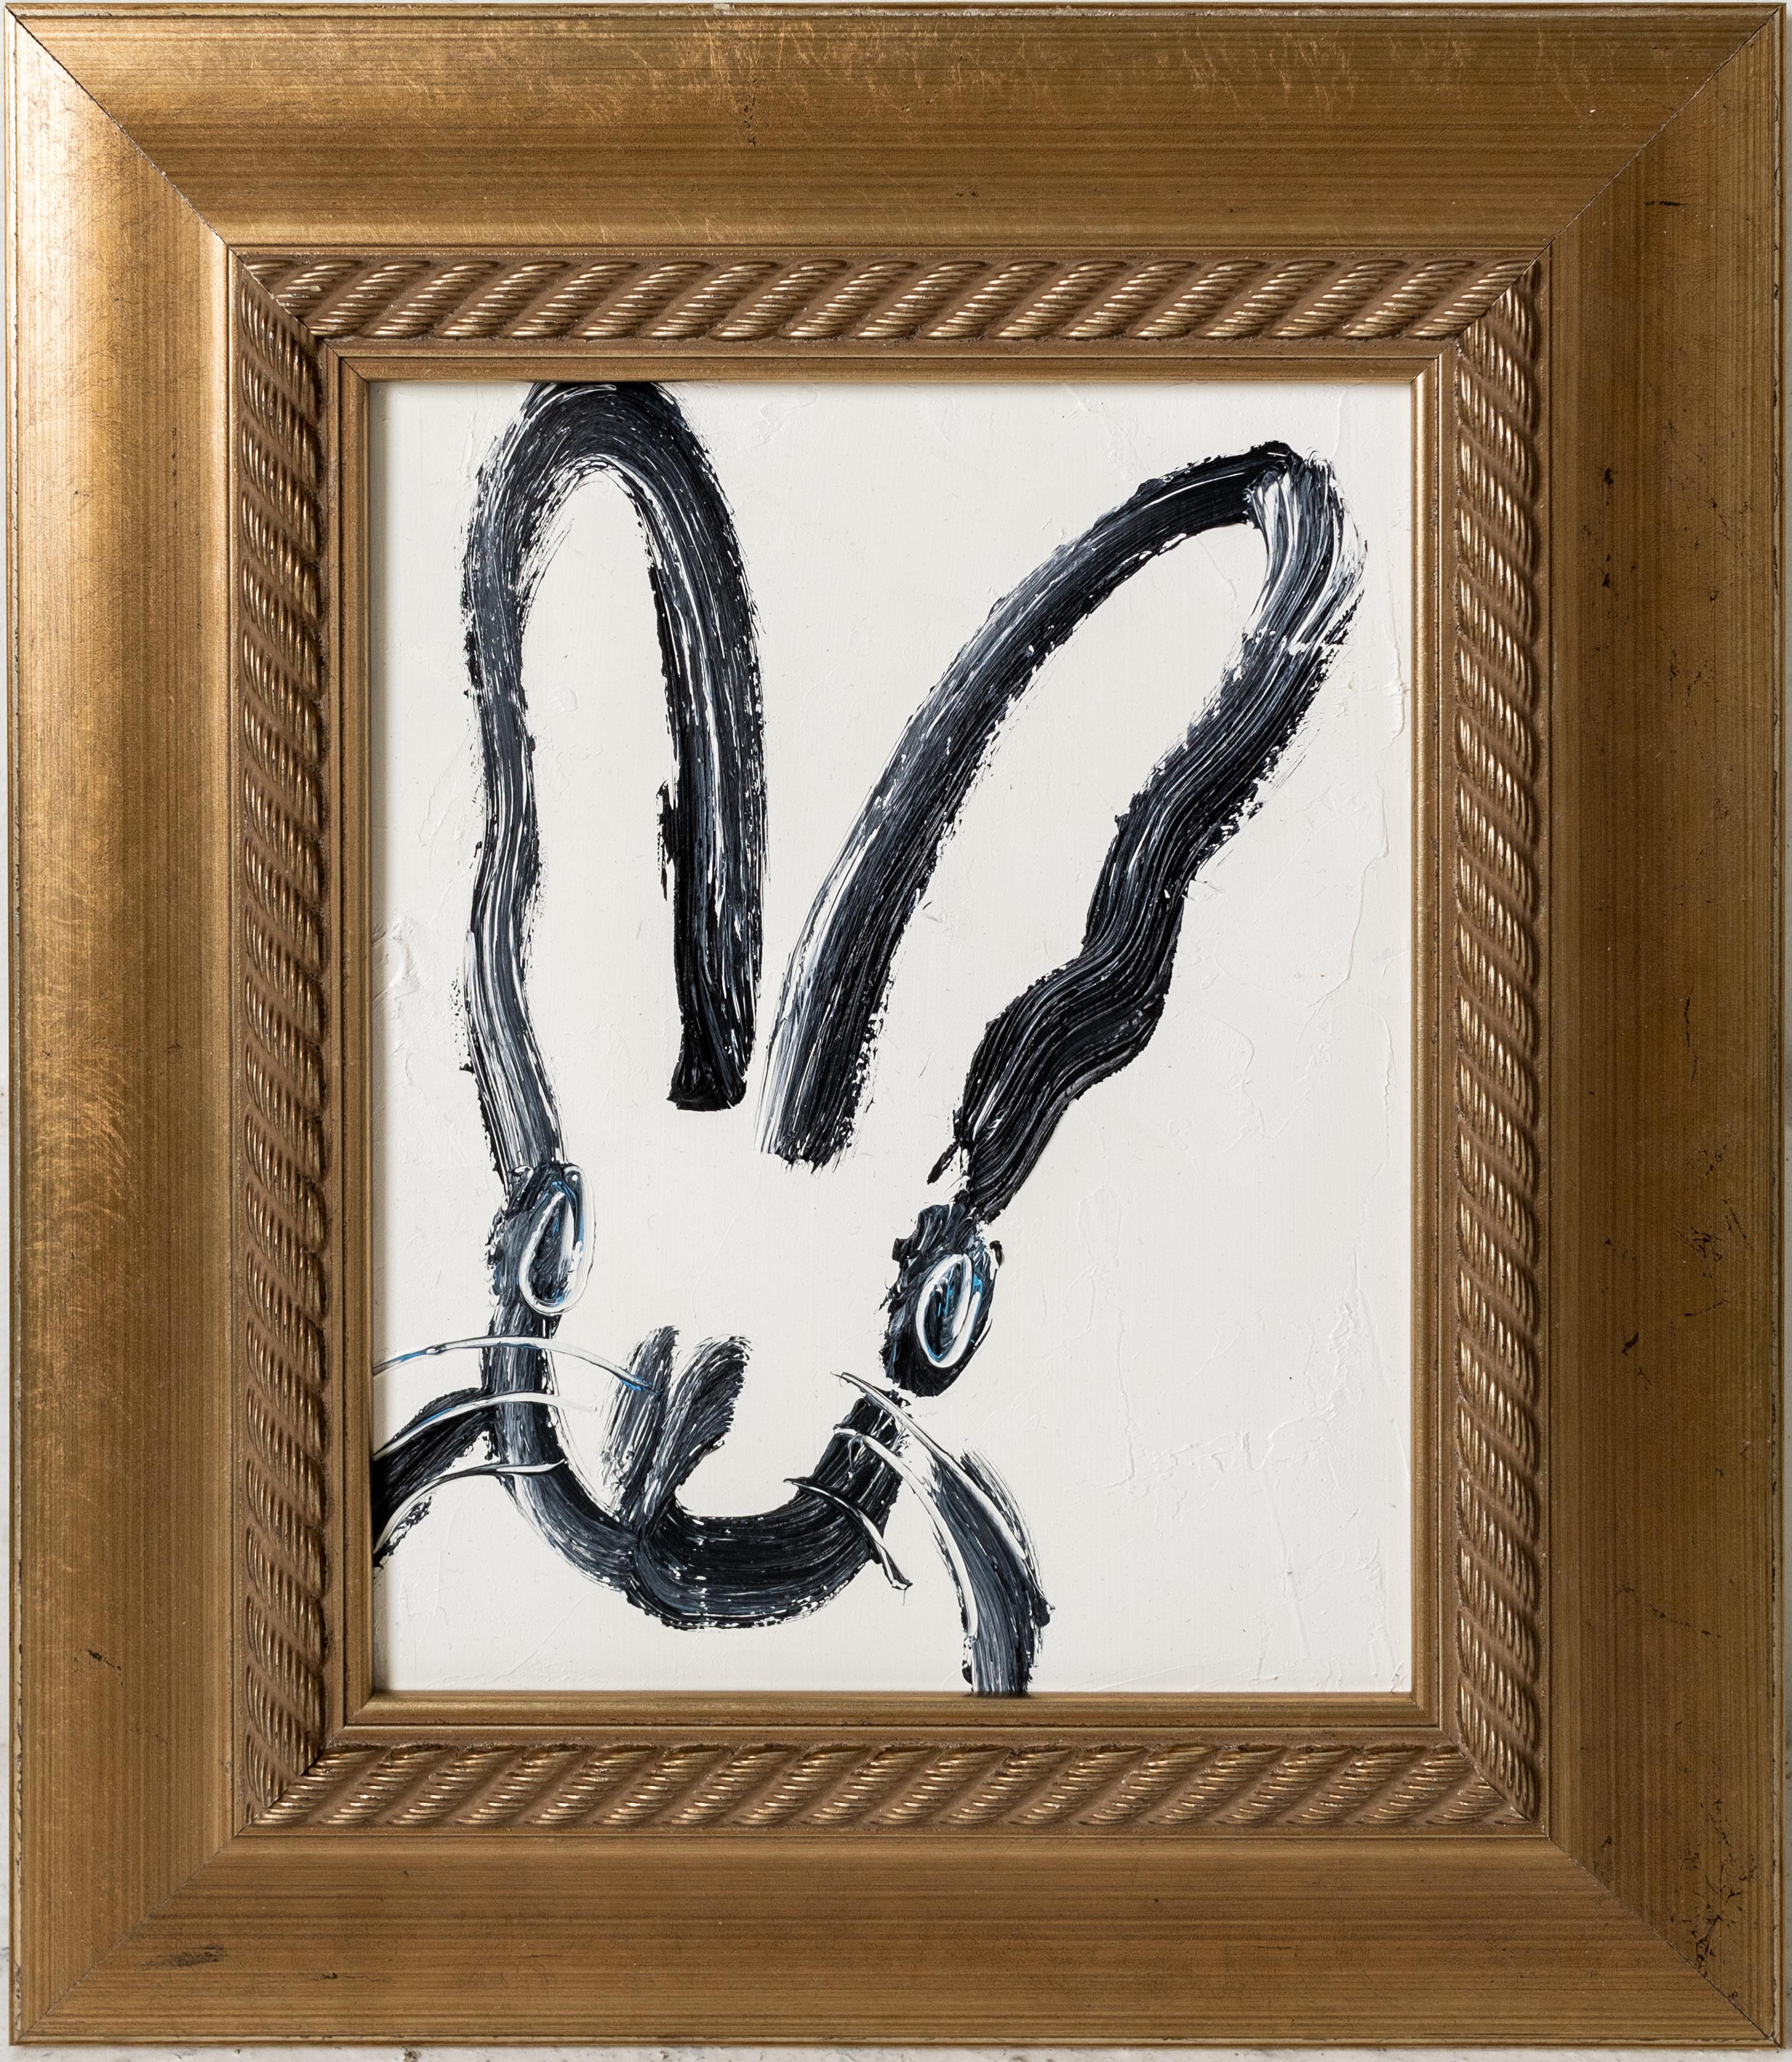 Hunt Slonem "Aura" Bunny on White Background
Black gestured bunny on a white background background in a vintage frame

Unframed: 10 x 8 inches  
Framed: 15 x 13 inches
*Painting is framed - Please note that not all Hunt Slonem frames are not in mint